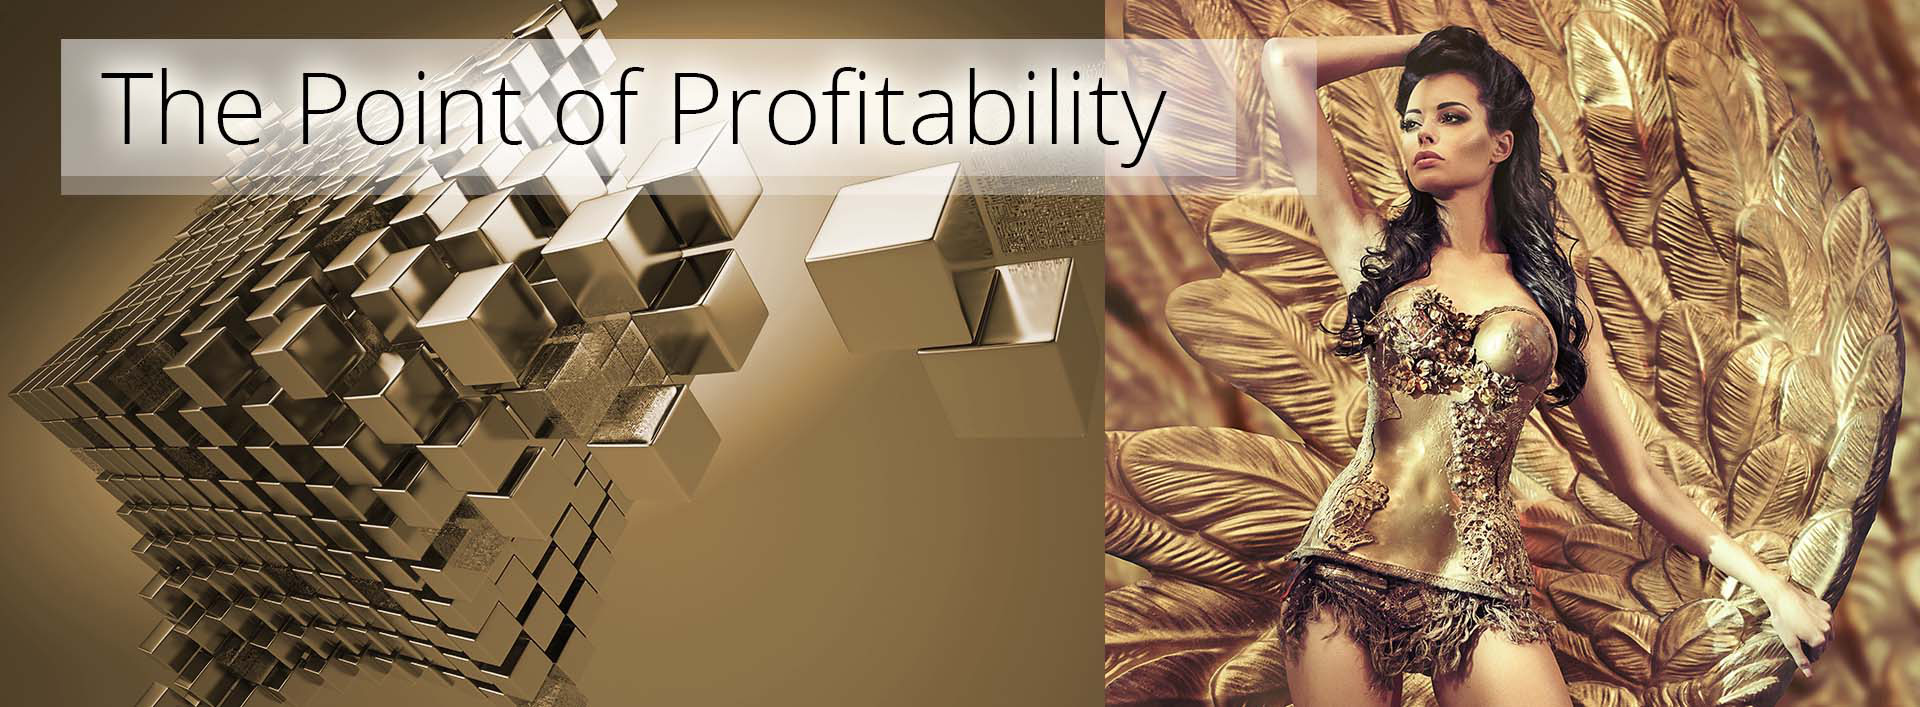 the point of profitability